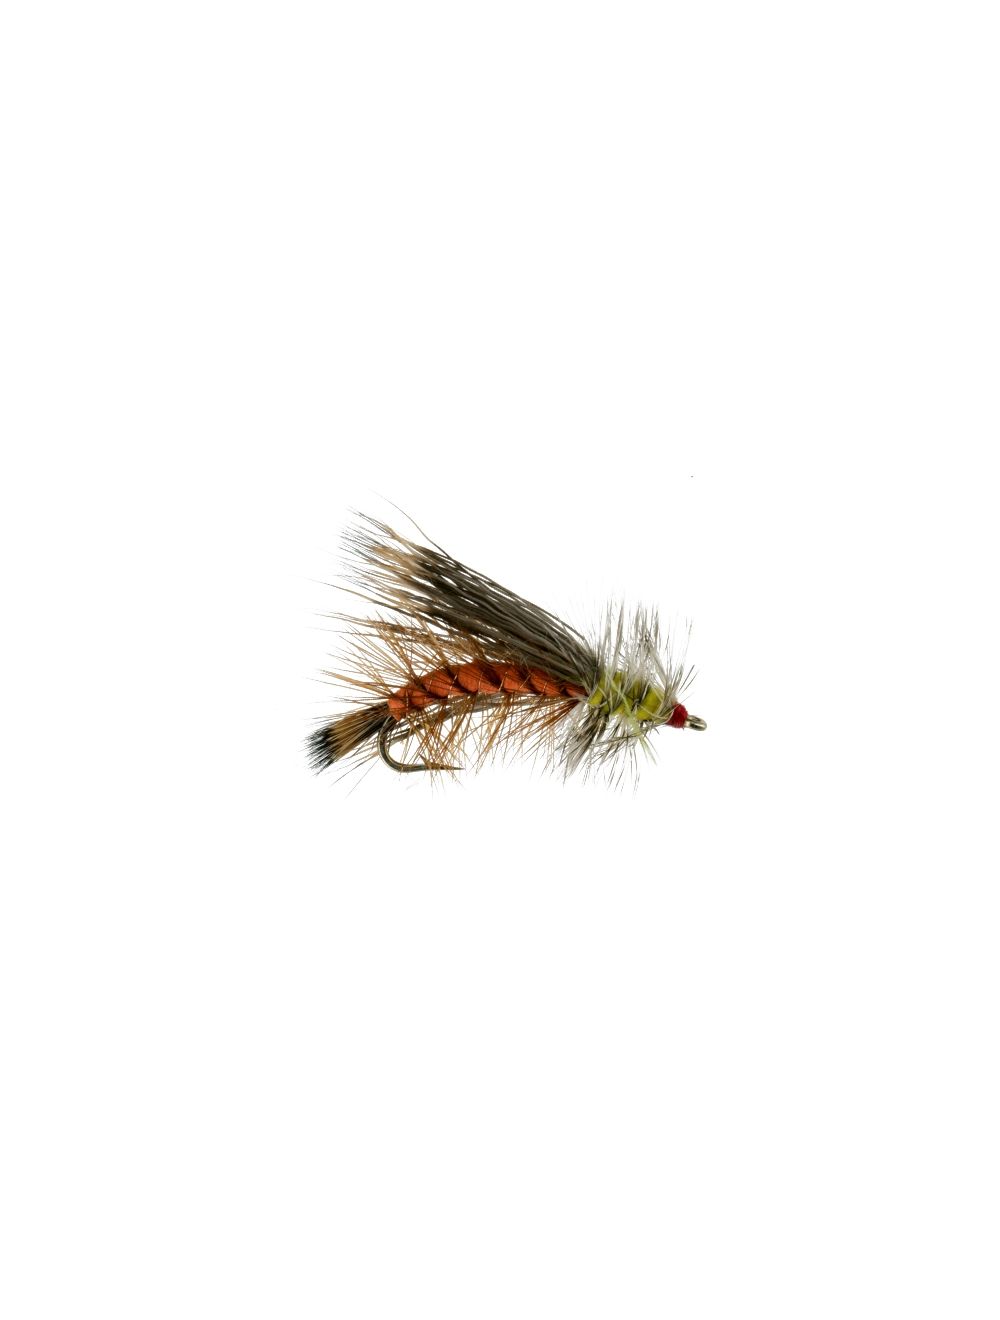 Orange Silly Leg Stimulator Fly Fishing Dry Trout Flies Size 10 DEADLY NEW  FLIES